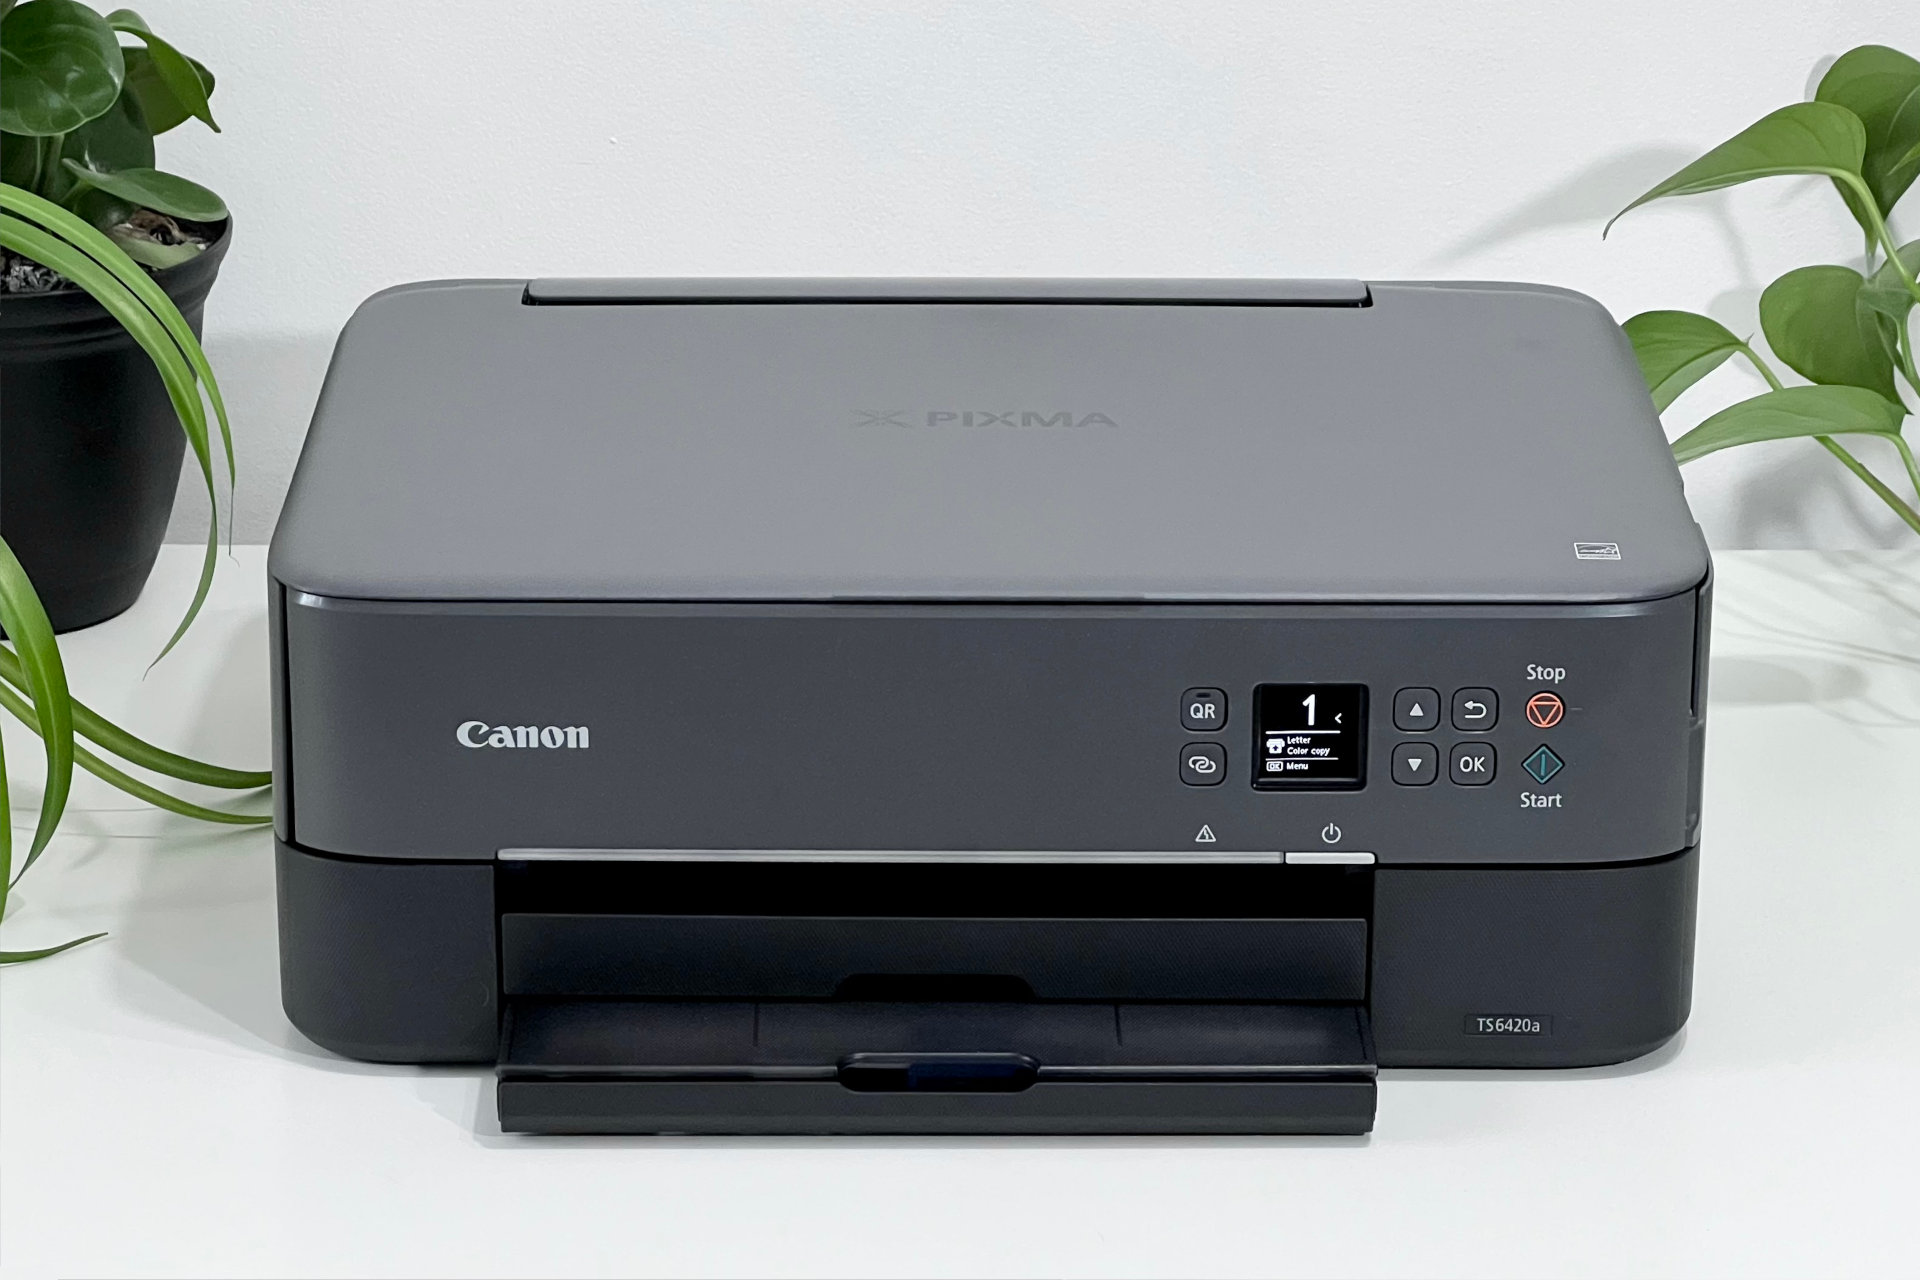 Canon Pixma TS6420 Wireless Inkjet All-In-One Printer Review